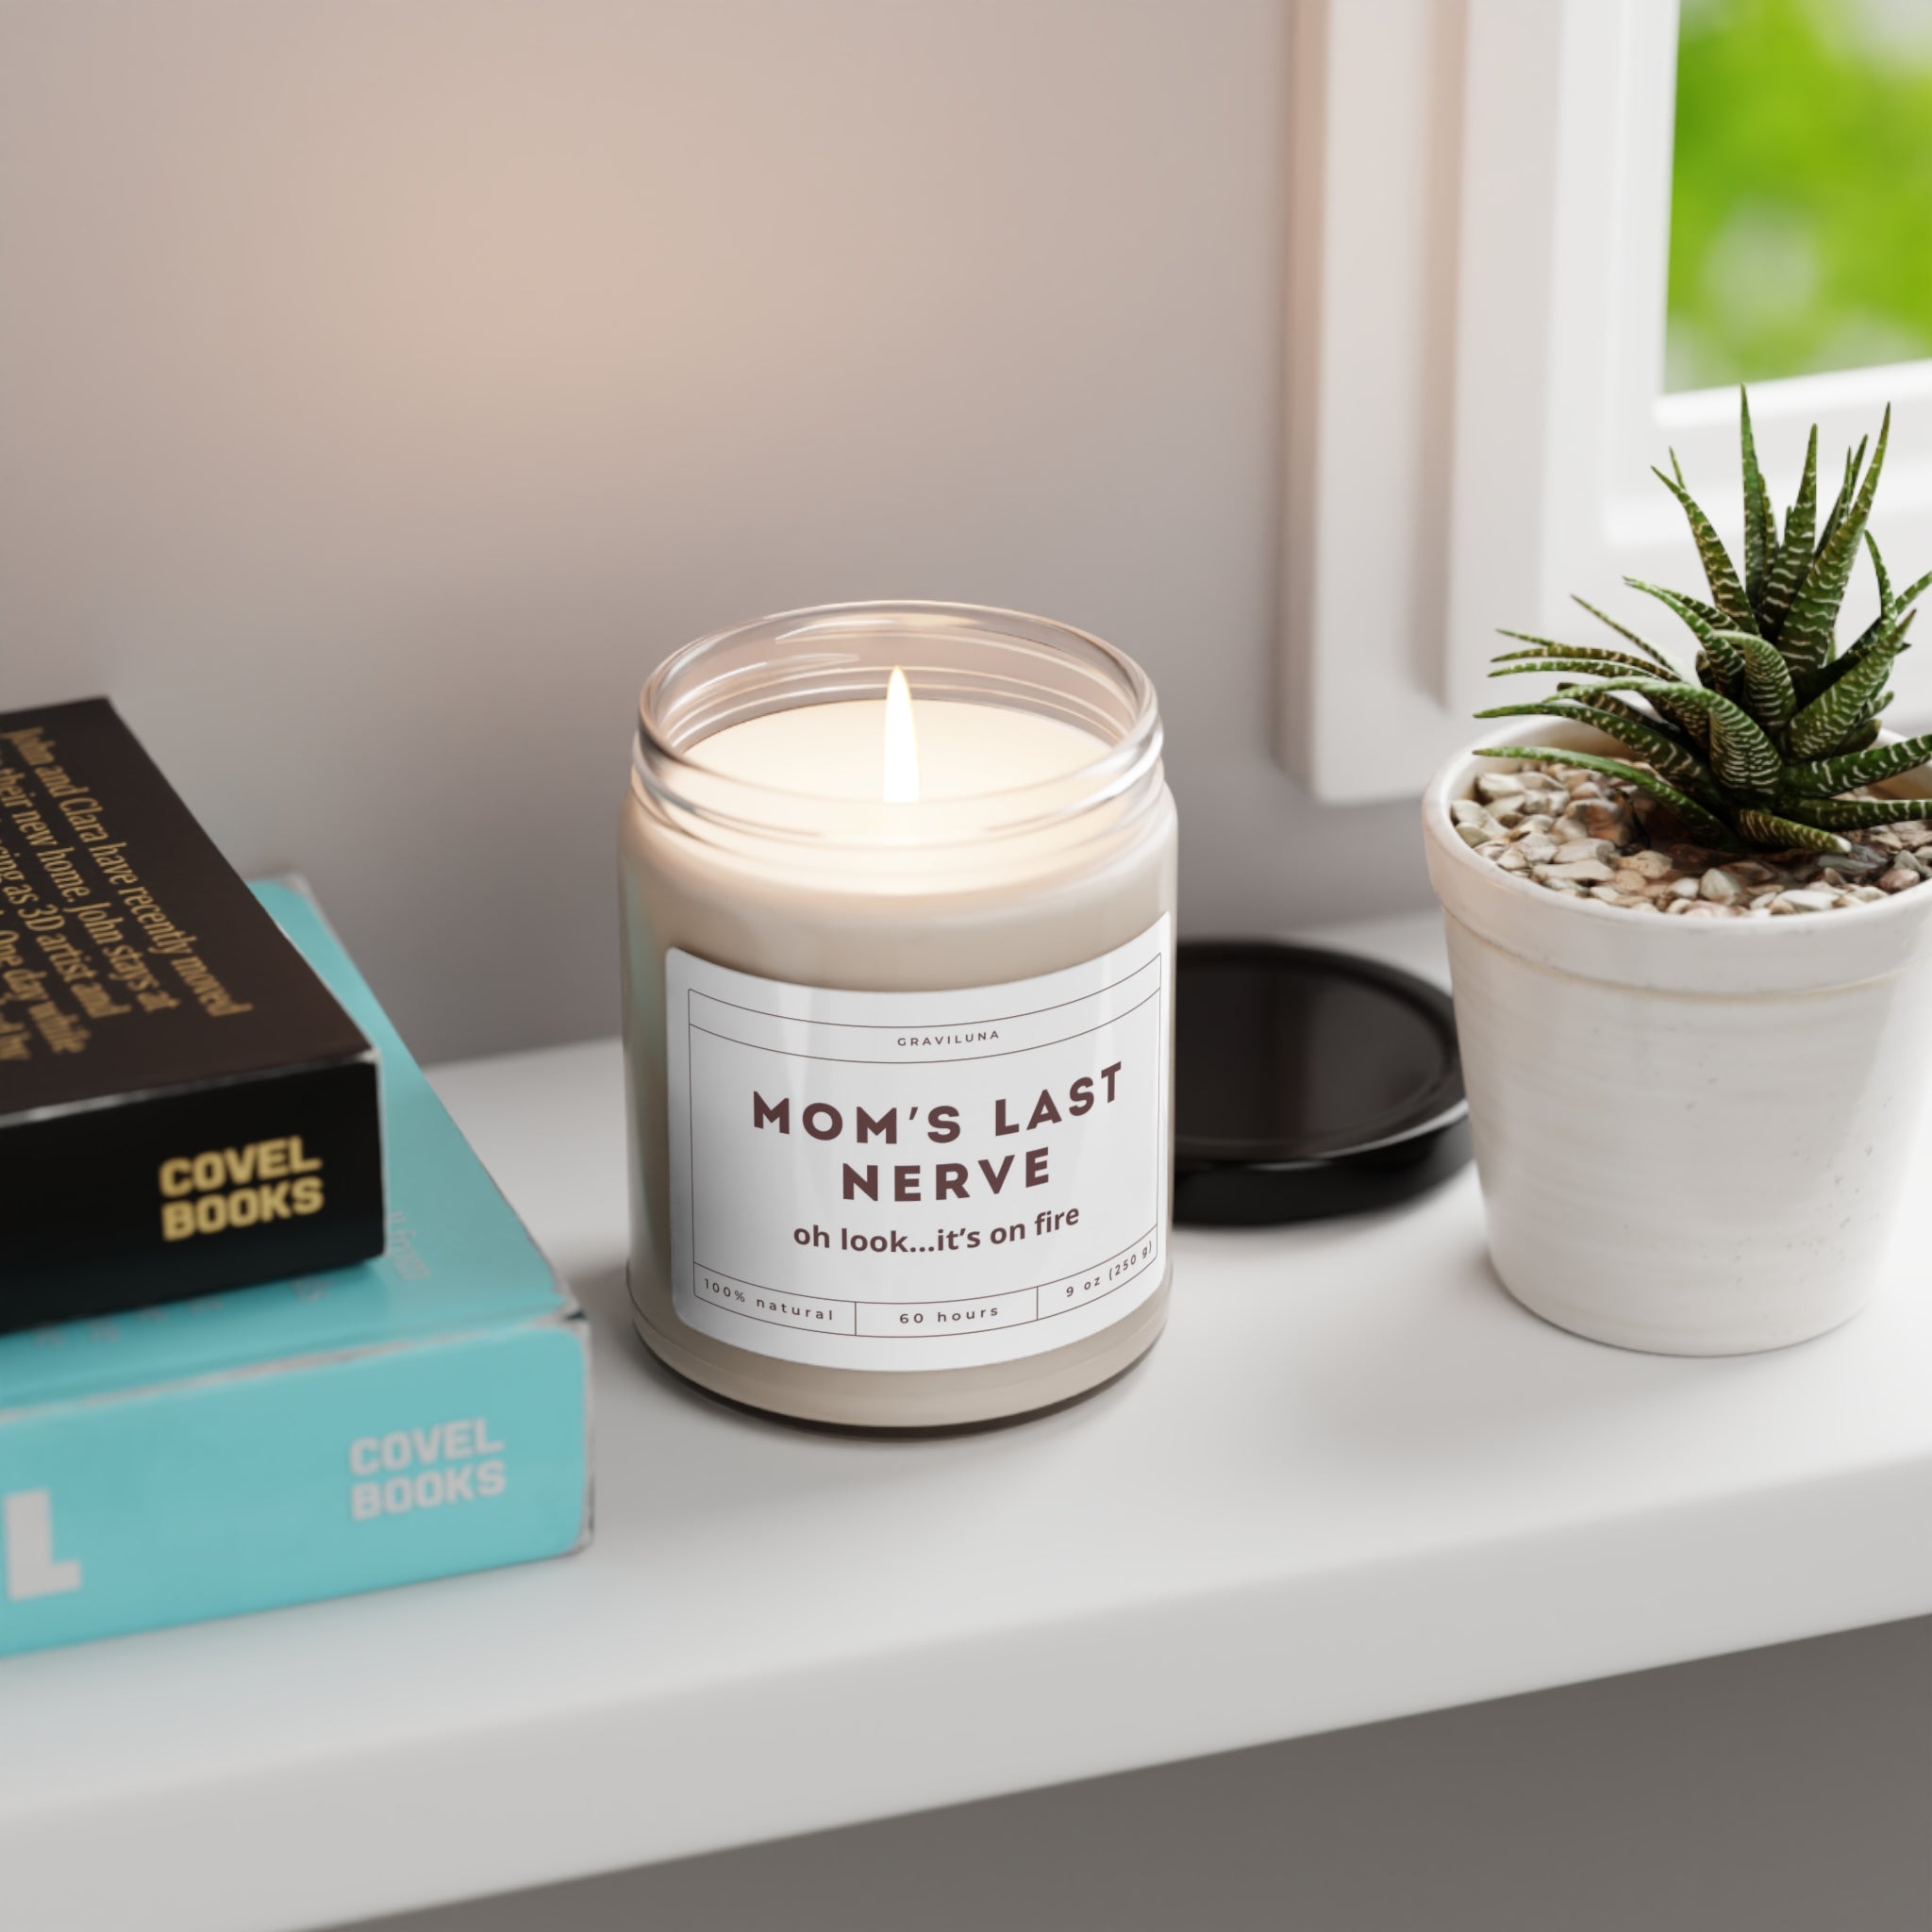 "Mom's Last Nerve" Candle